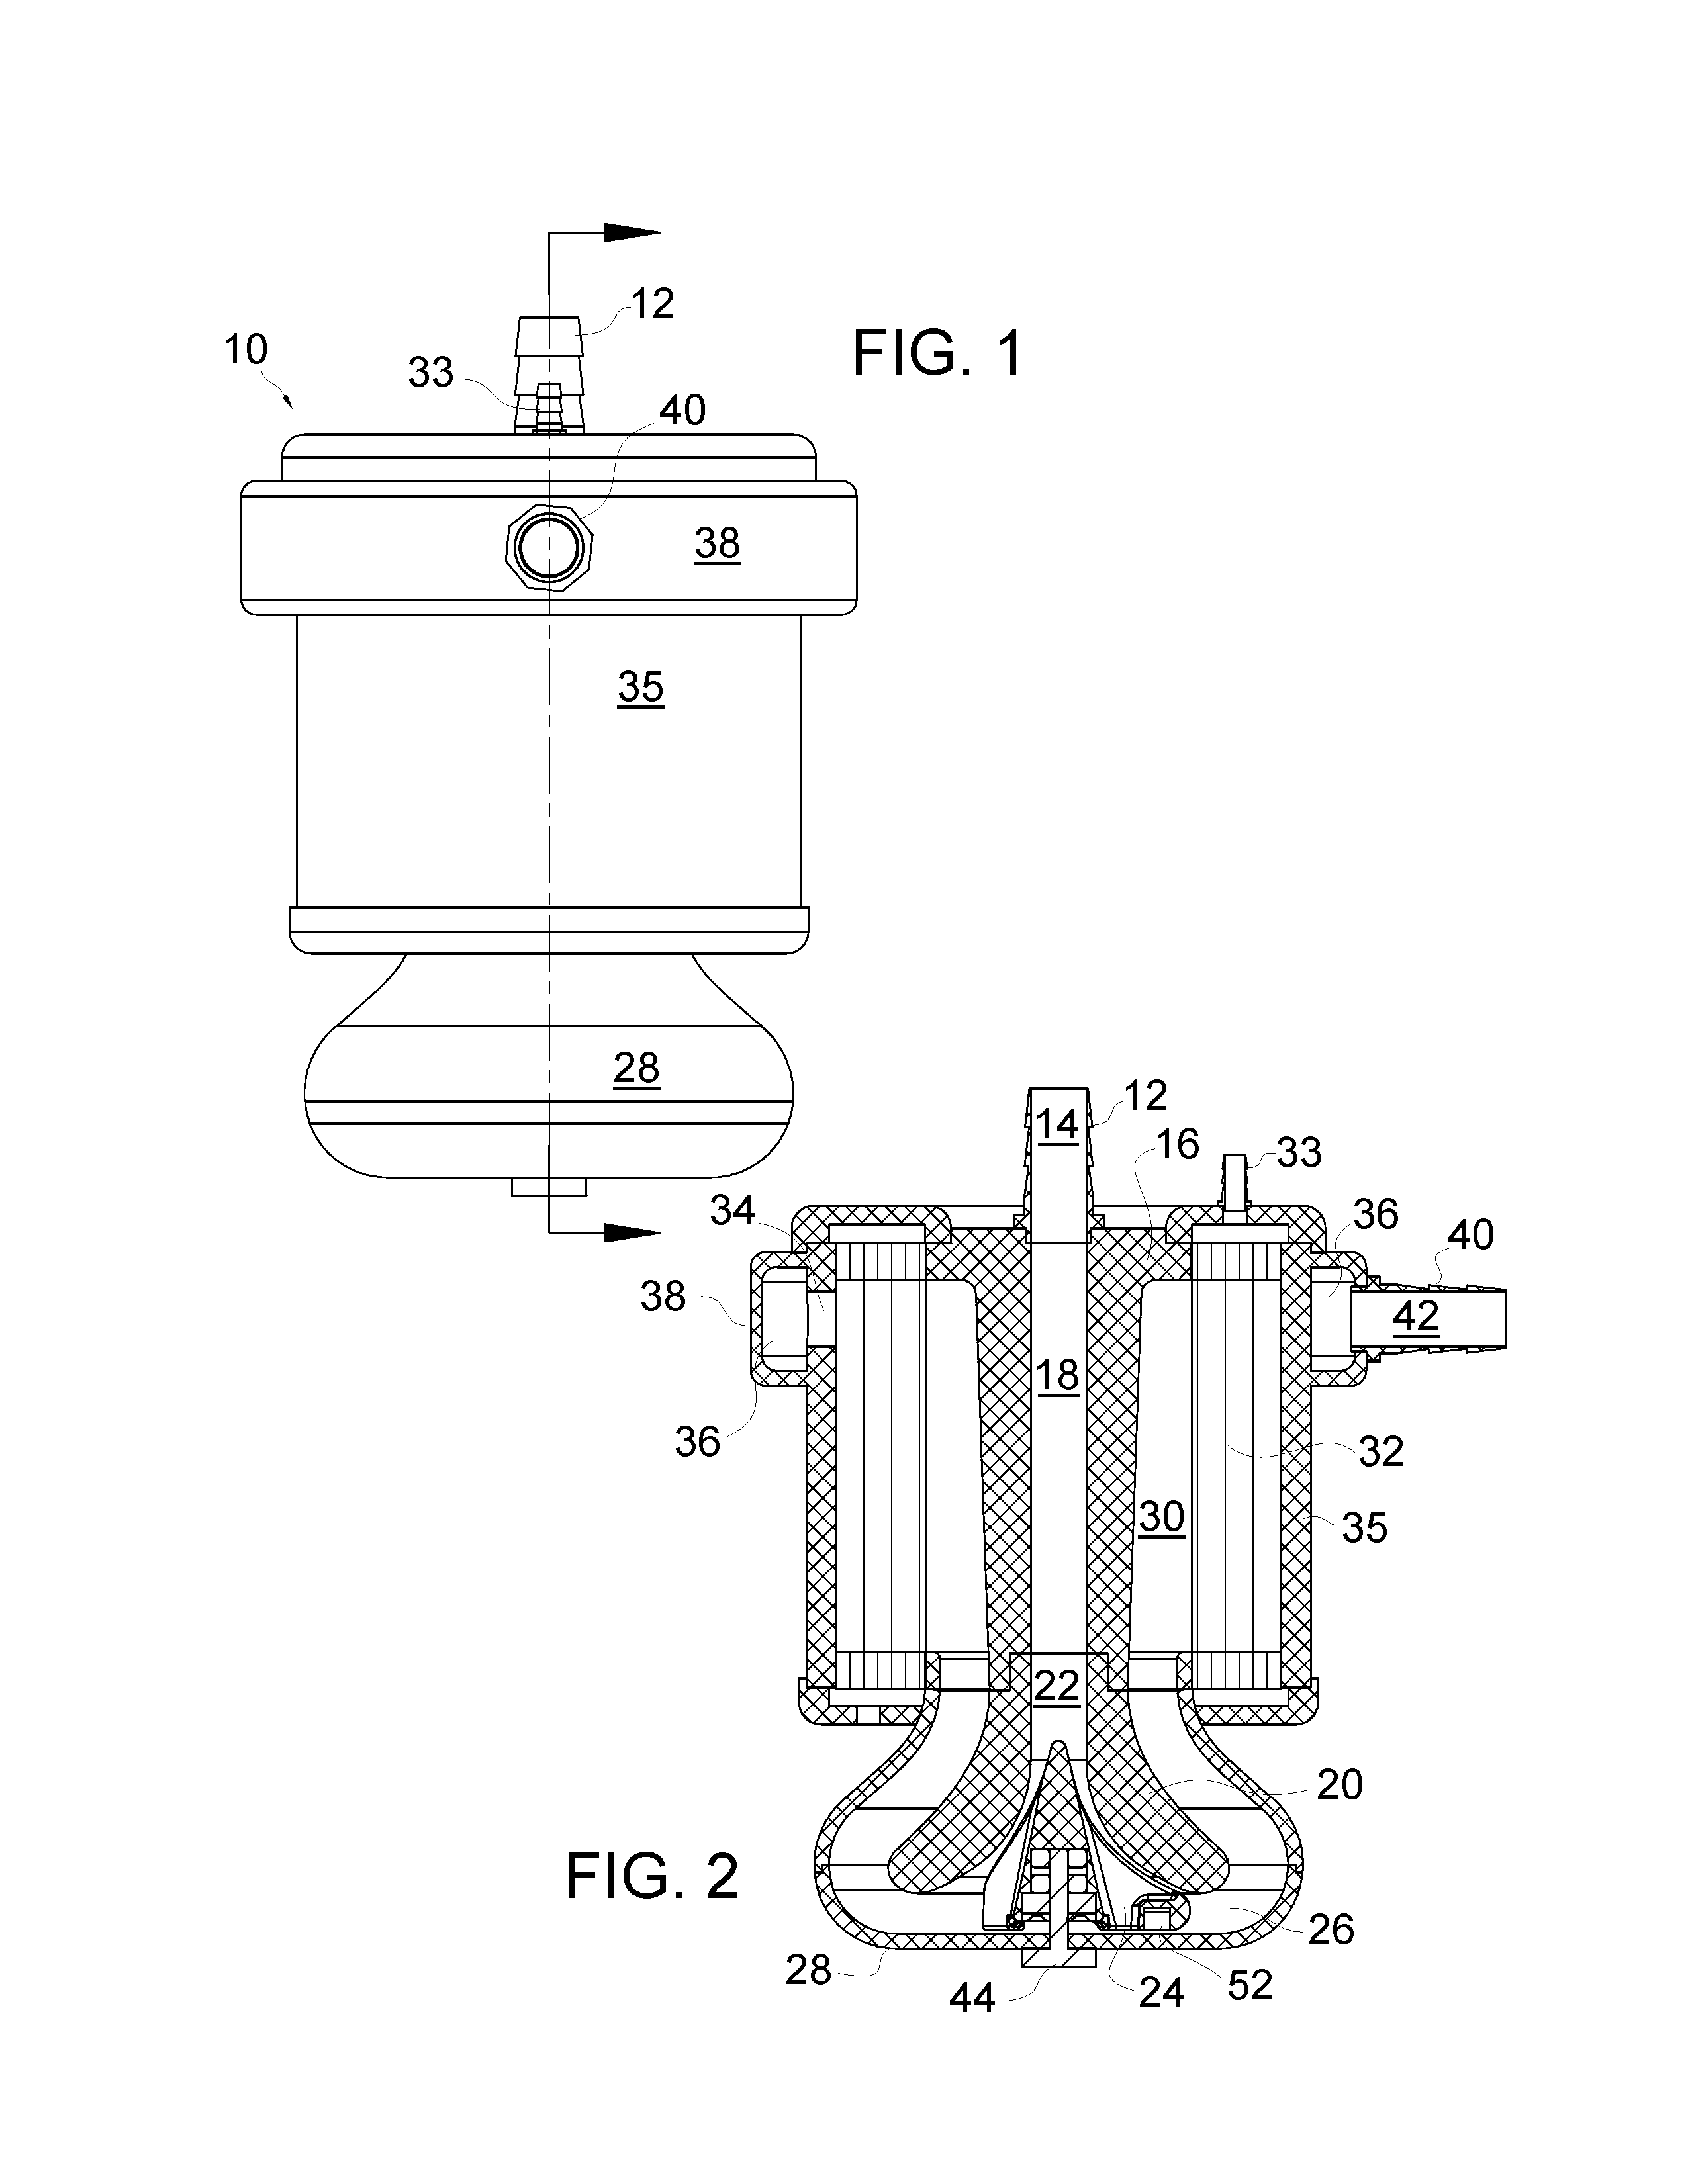 Compact integrated blood pump oxygenator or gas transfer device with hydrogel impeller packing material and rollover impeller outlet